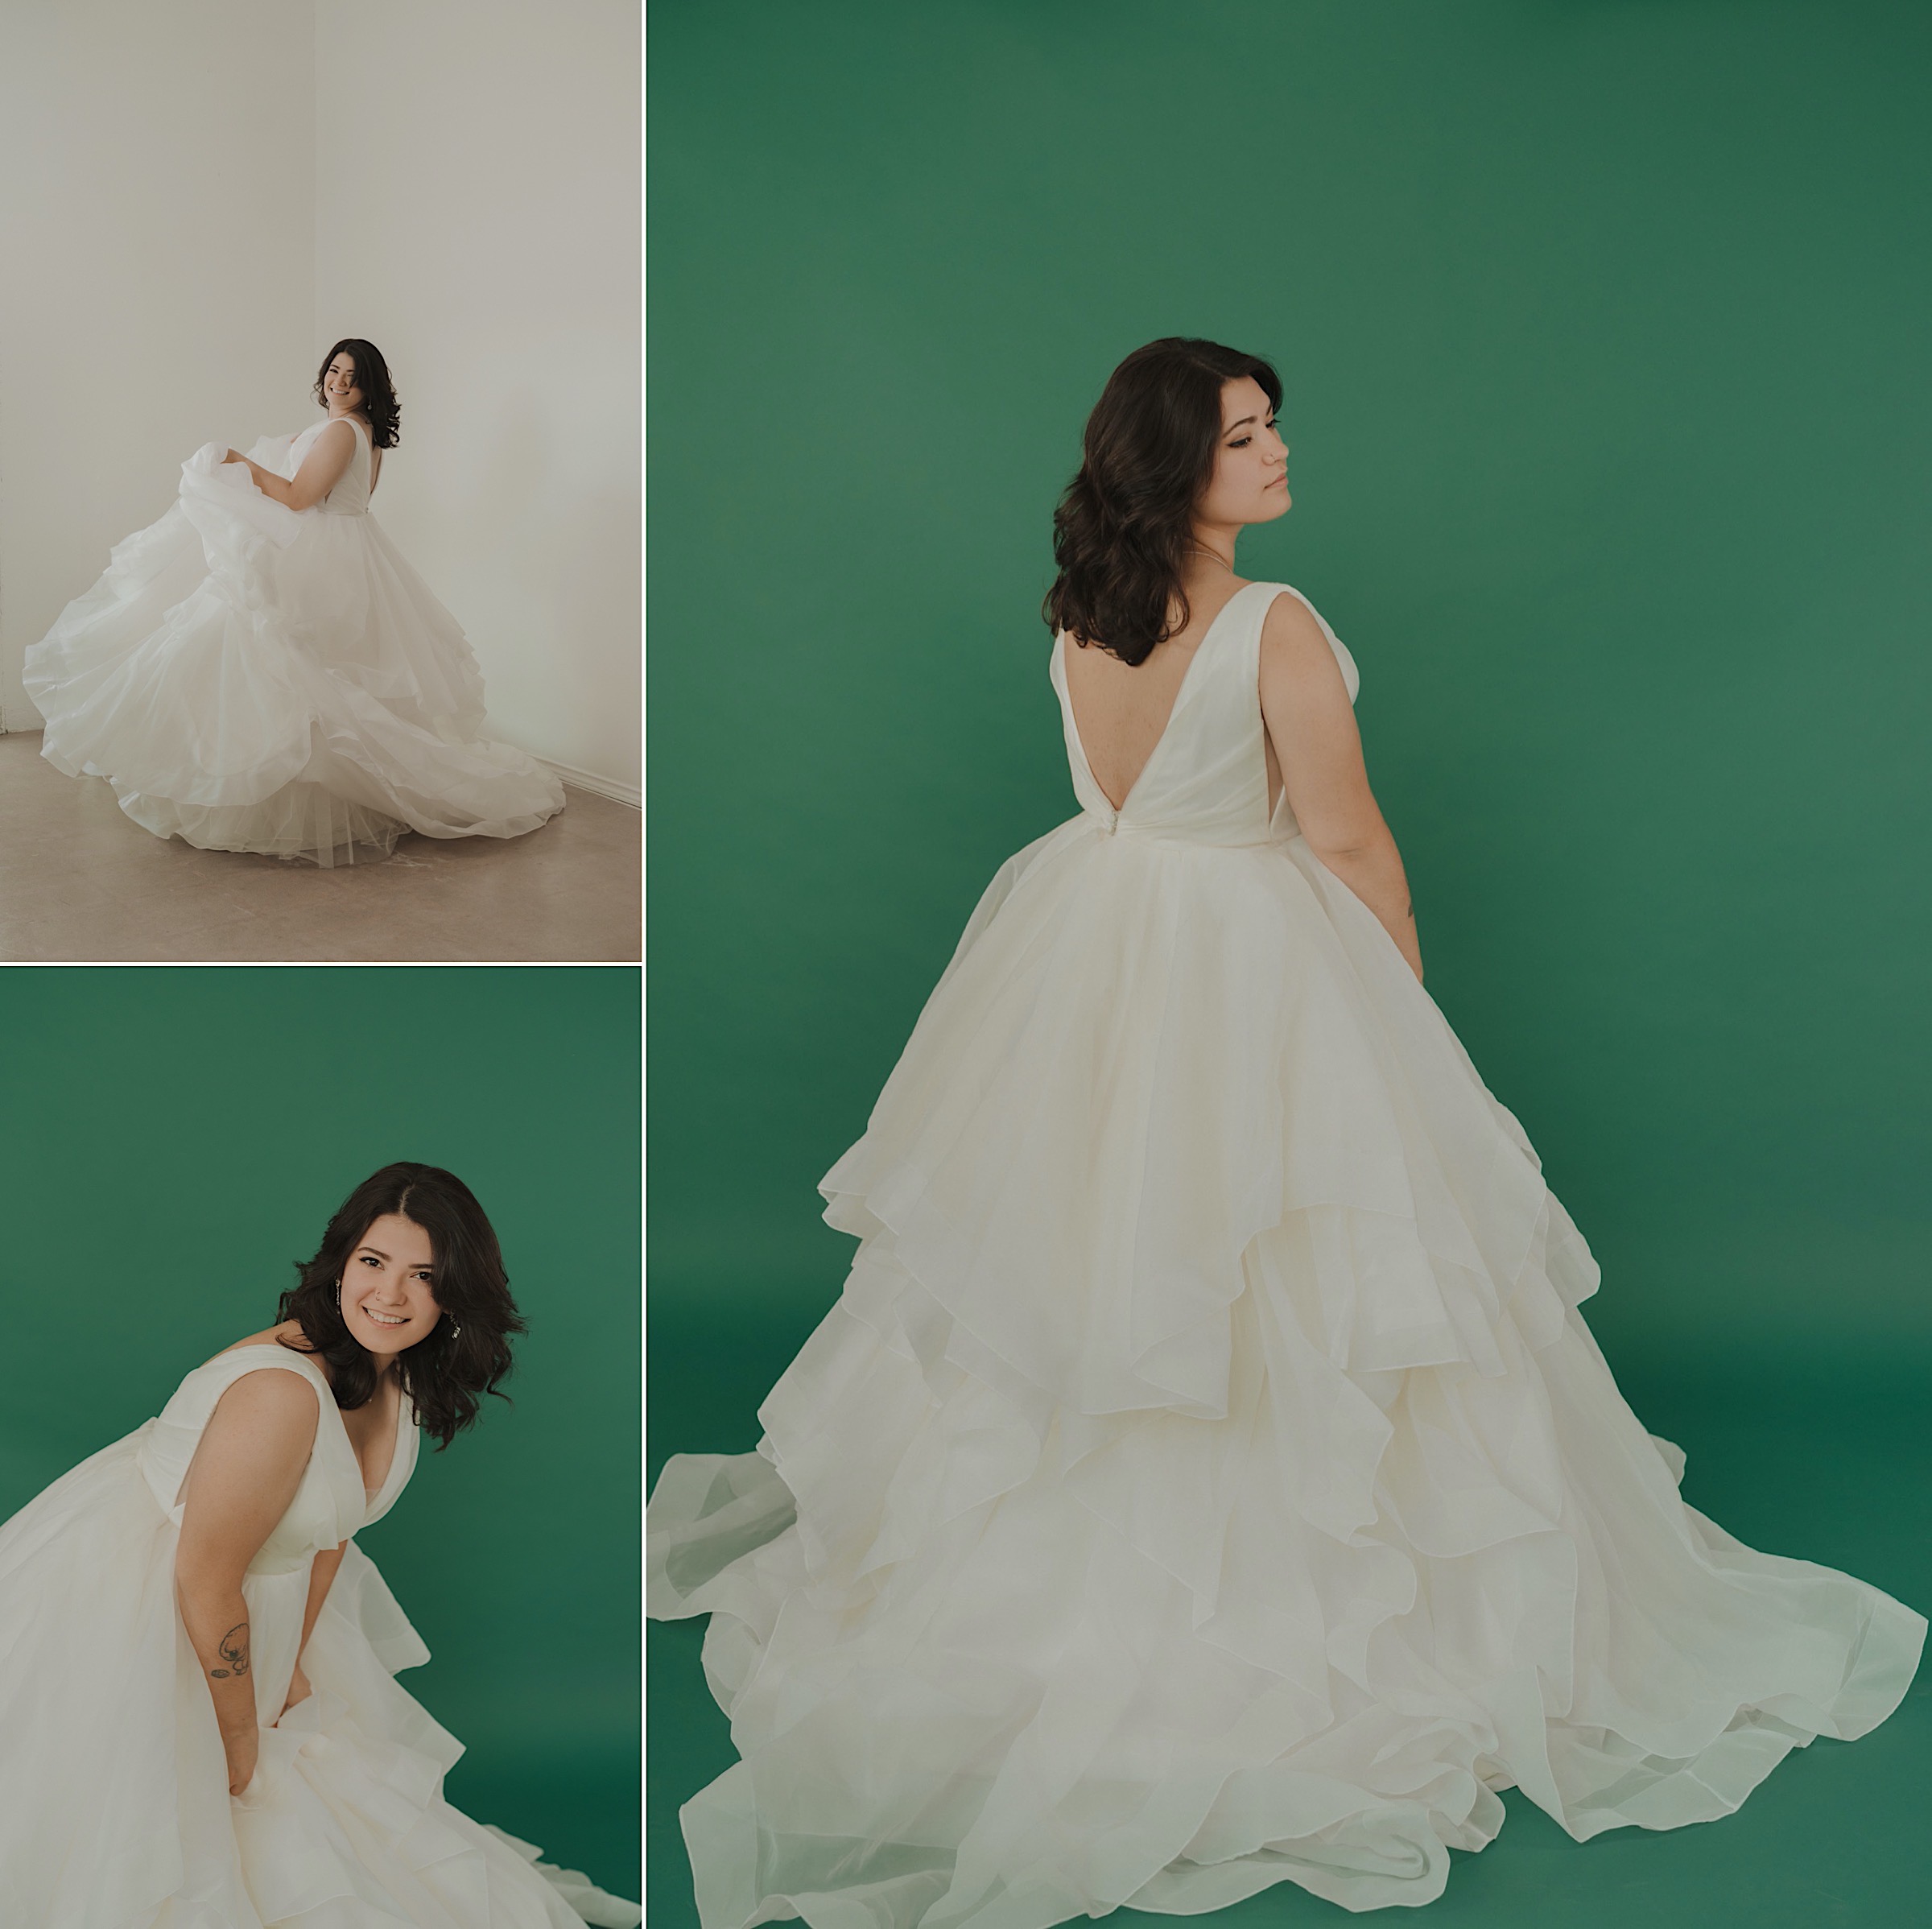 studio-bridal-portrait-session-green-white-background-tattoos-back-of-gown-spinning